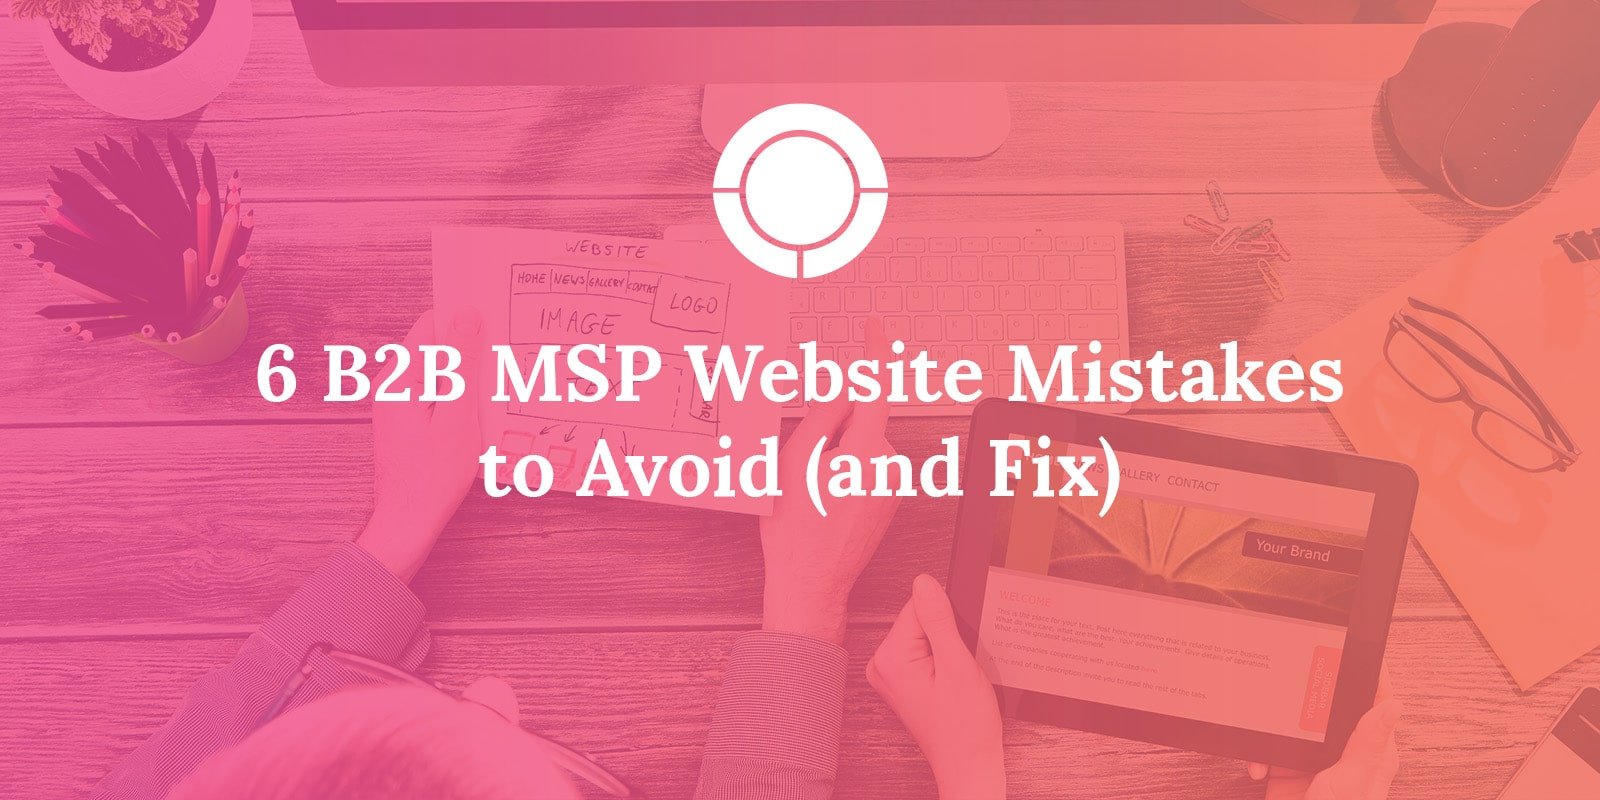 B2B MSP Website Mistakes to Avoid (and Fix)